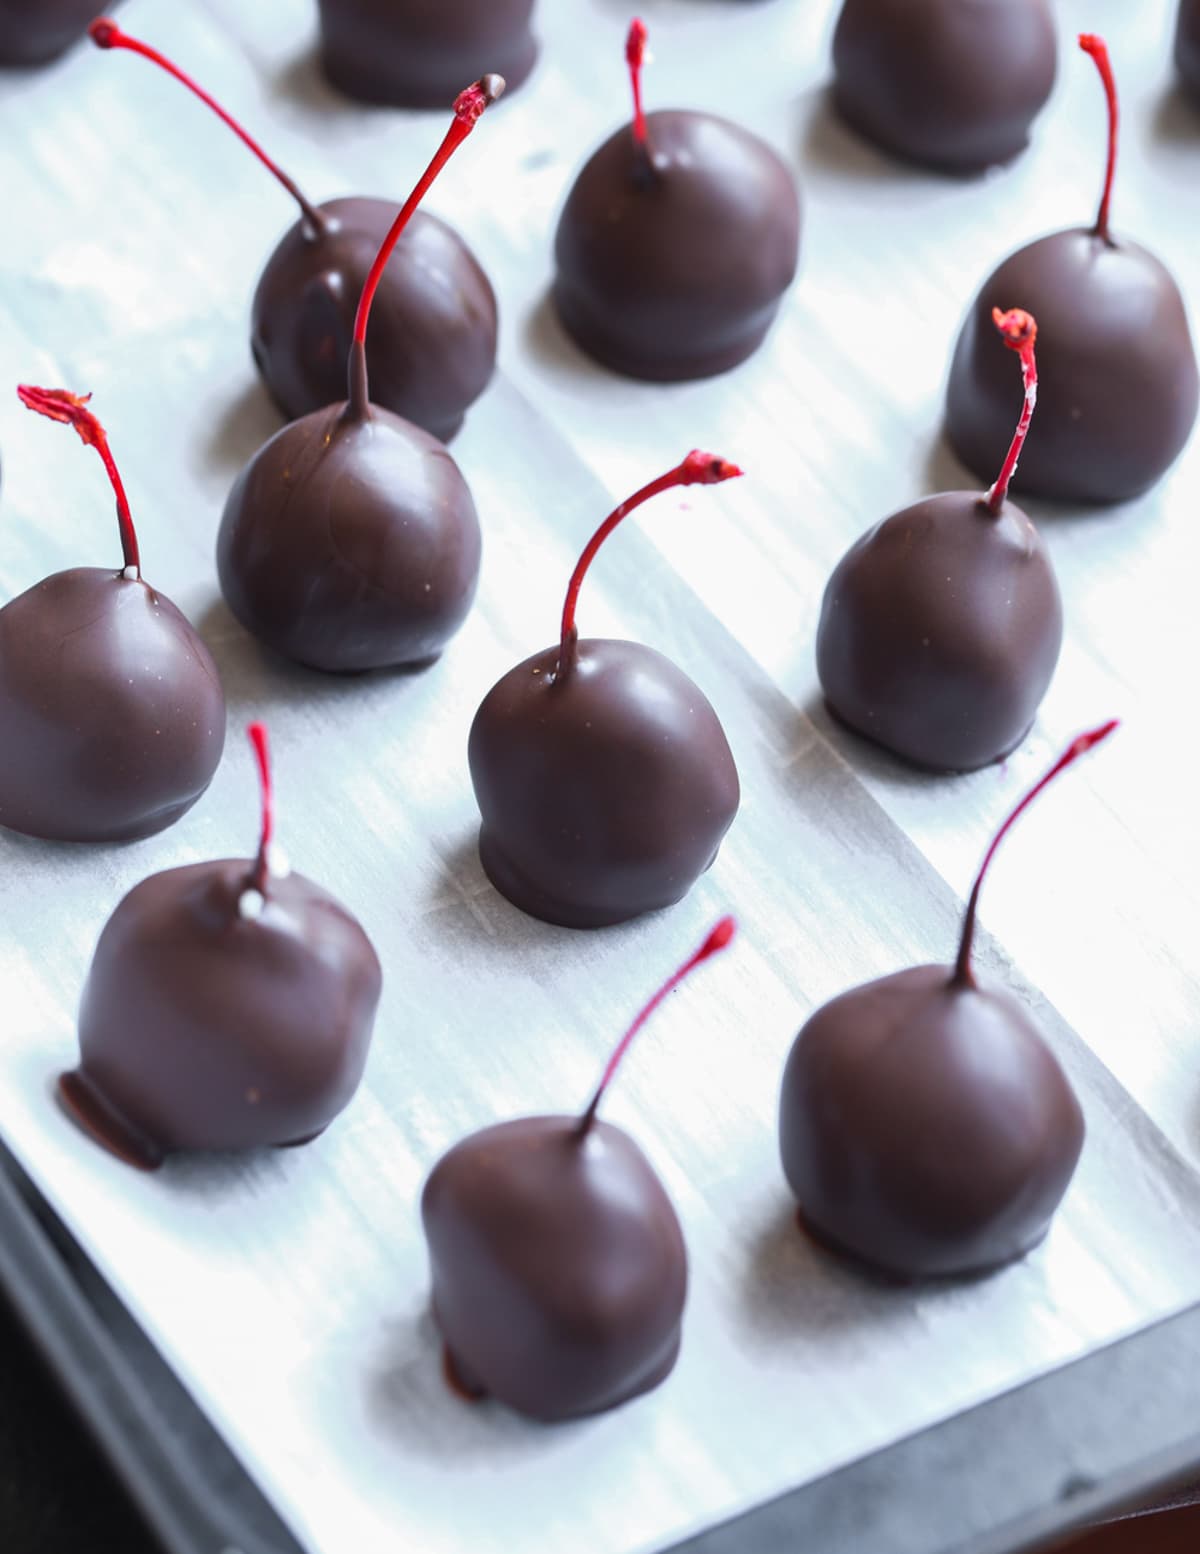 Freshly dipped chocolate cherries on parchment paper.